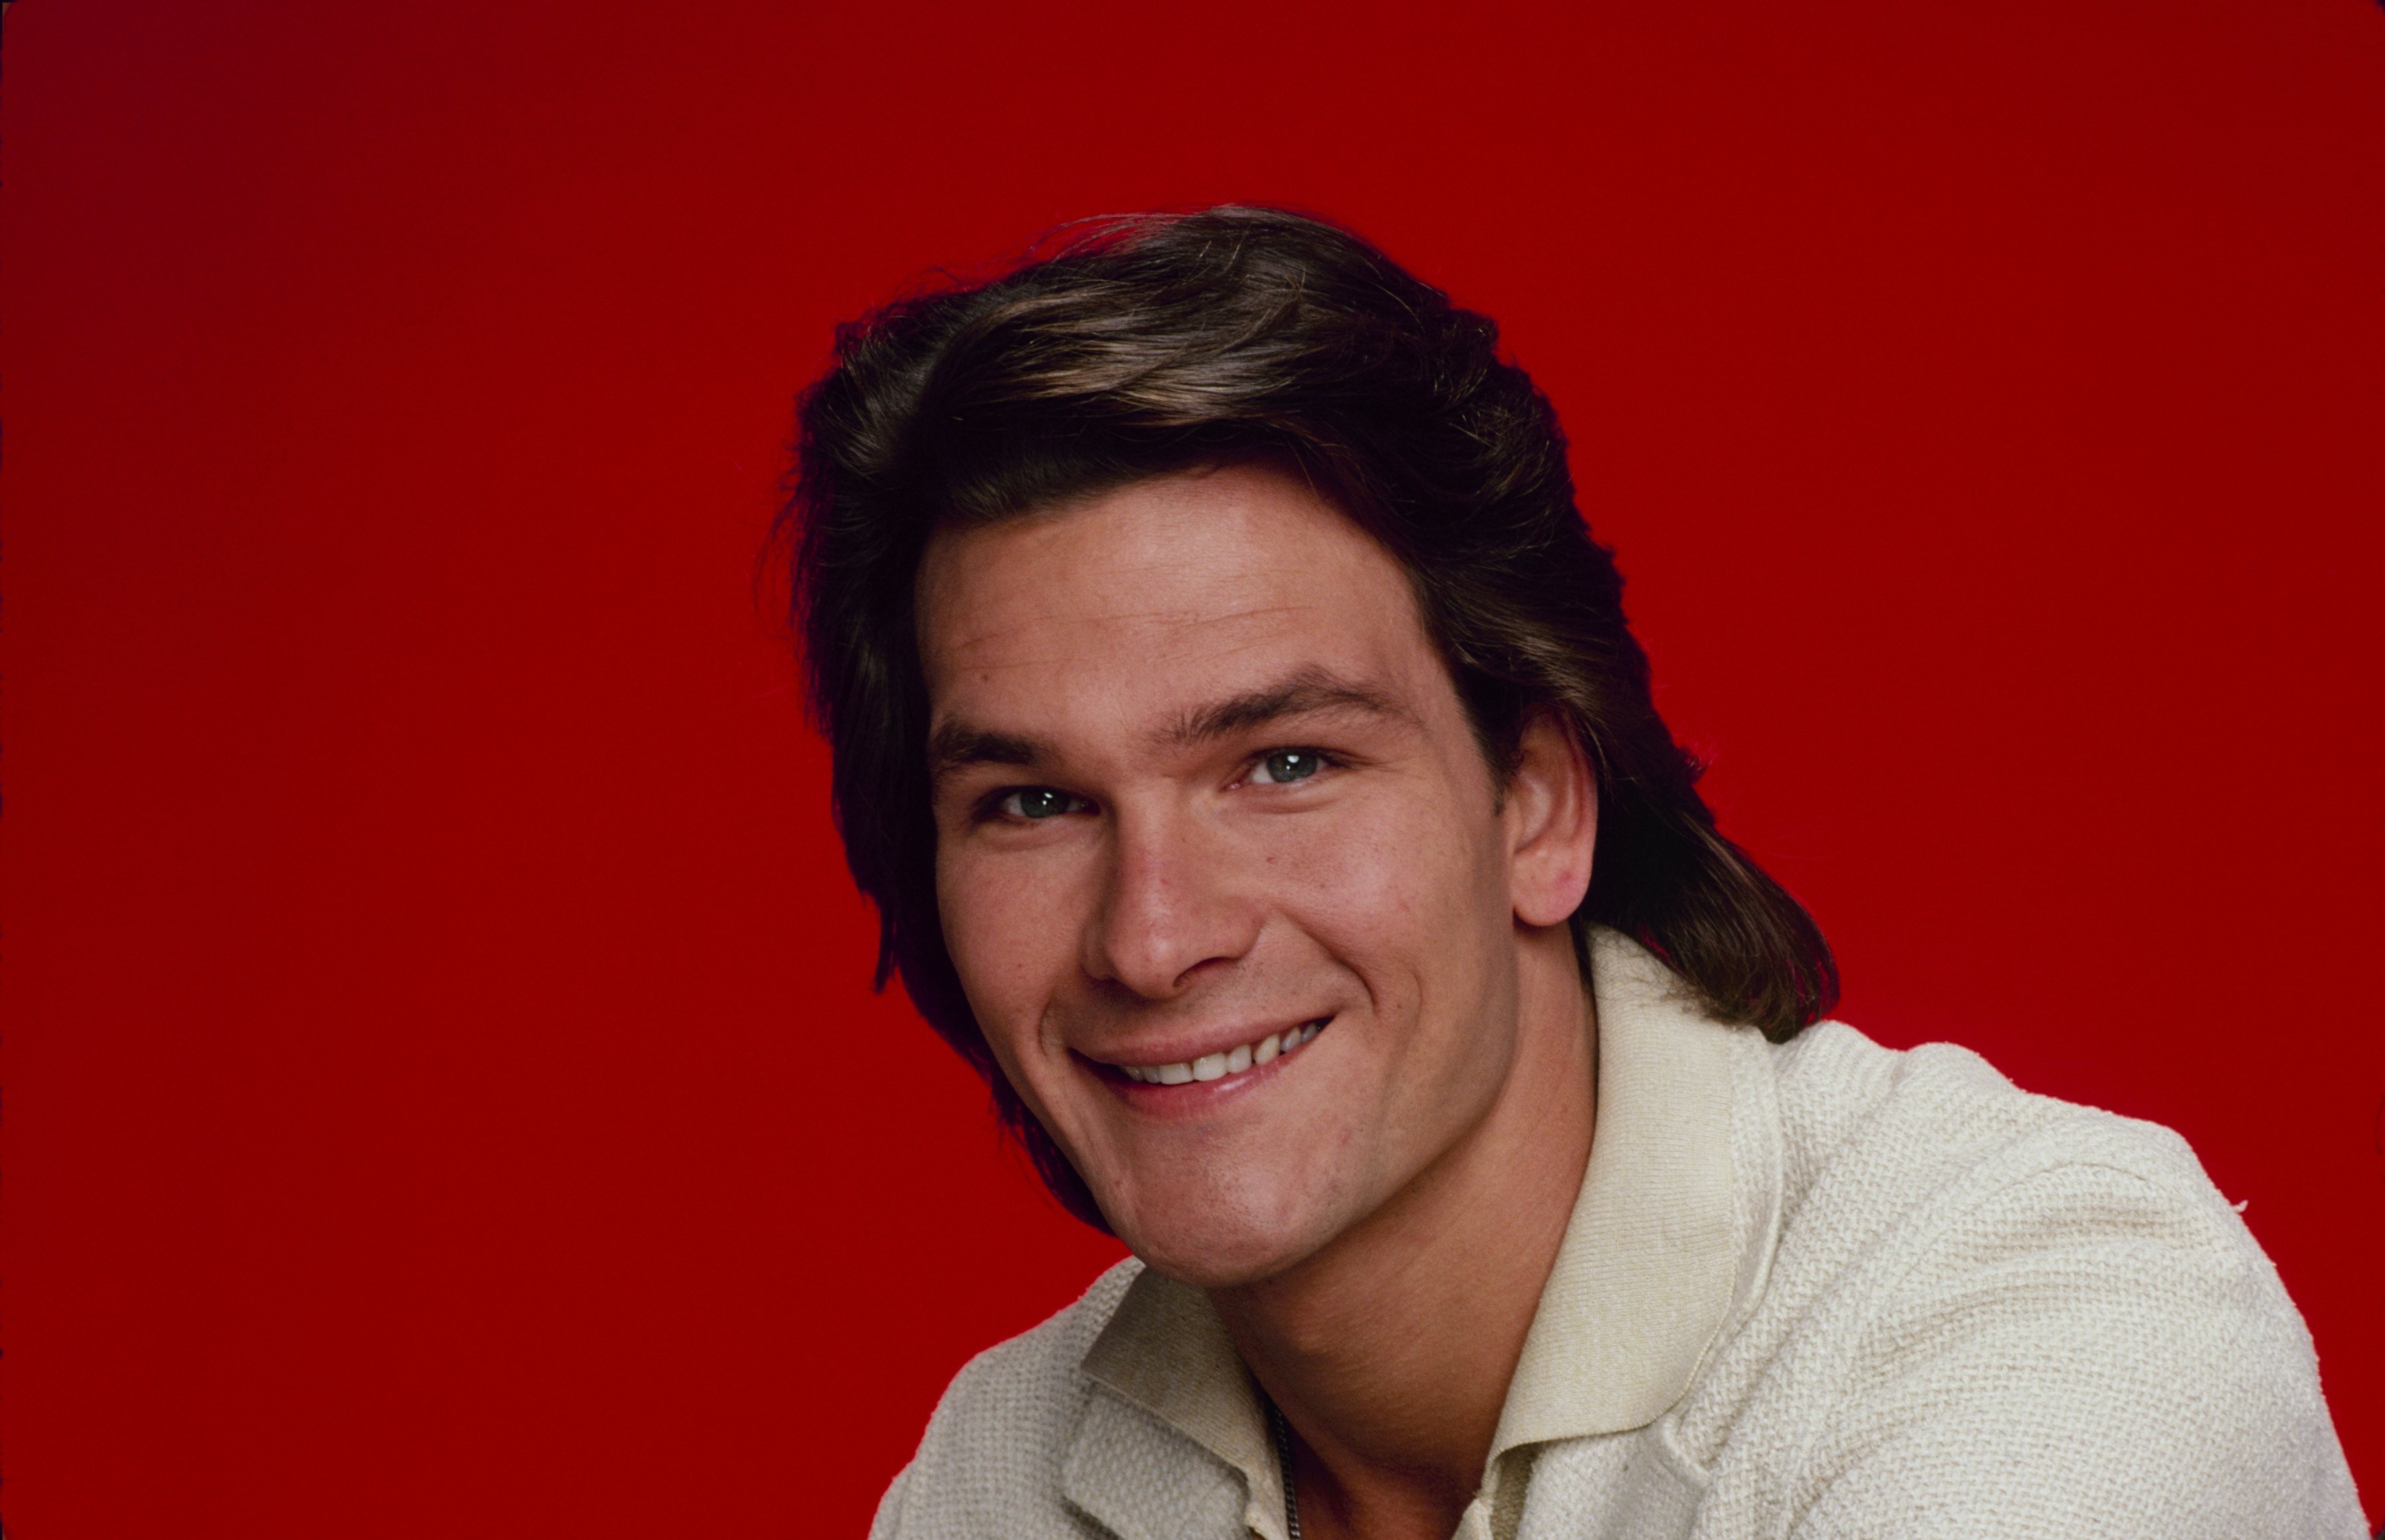 Patrick Swayze for "The Renegades" - Cast gallery 1982 | Photo: Getty Images